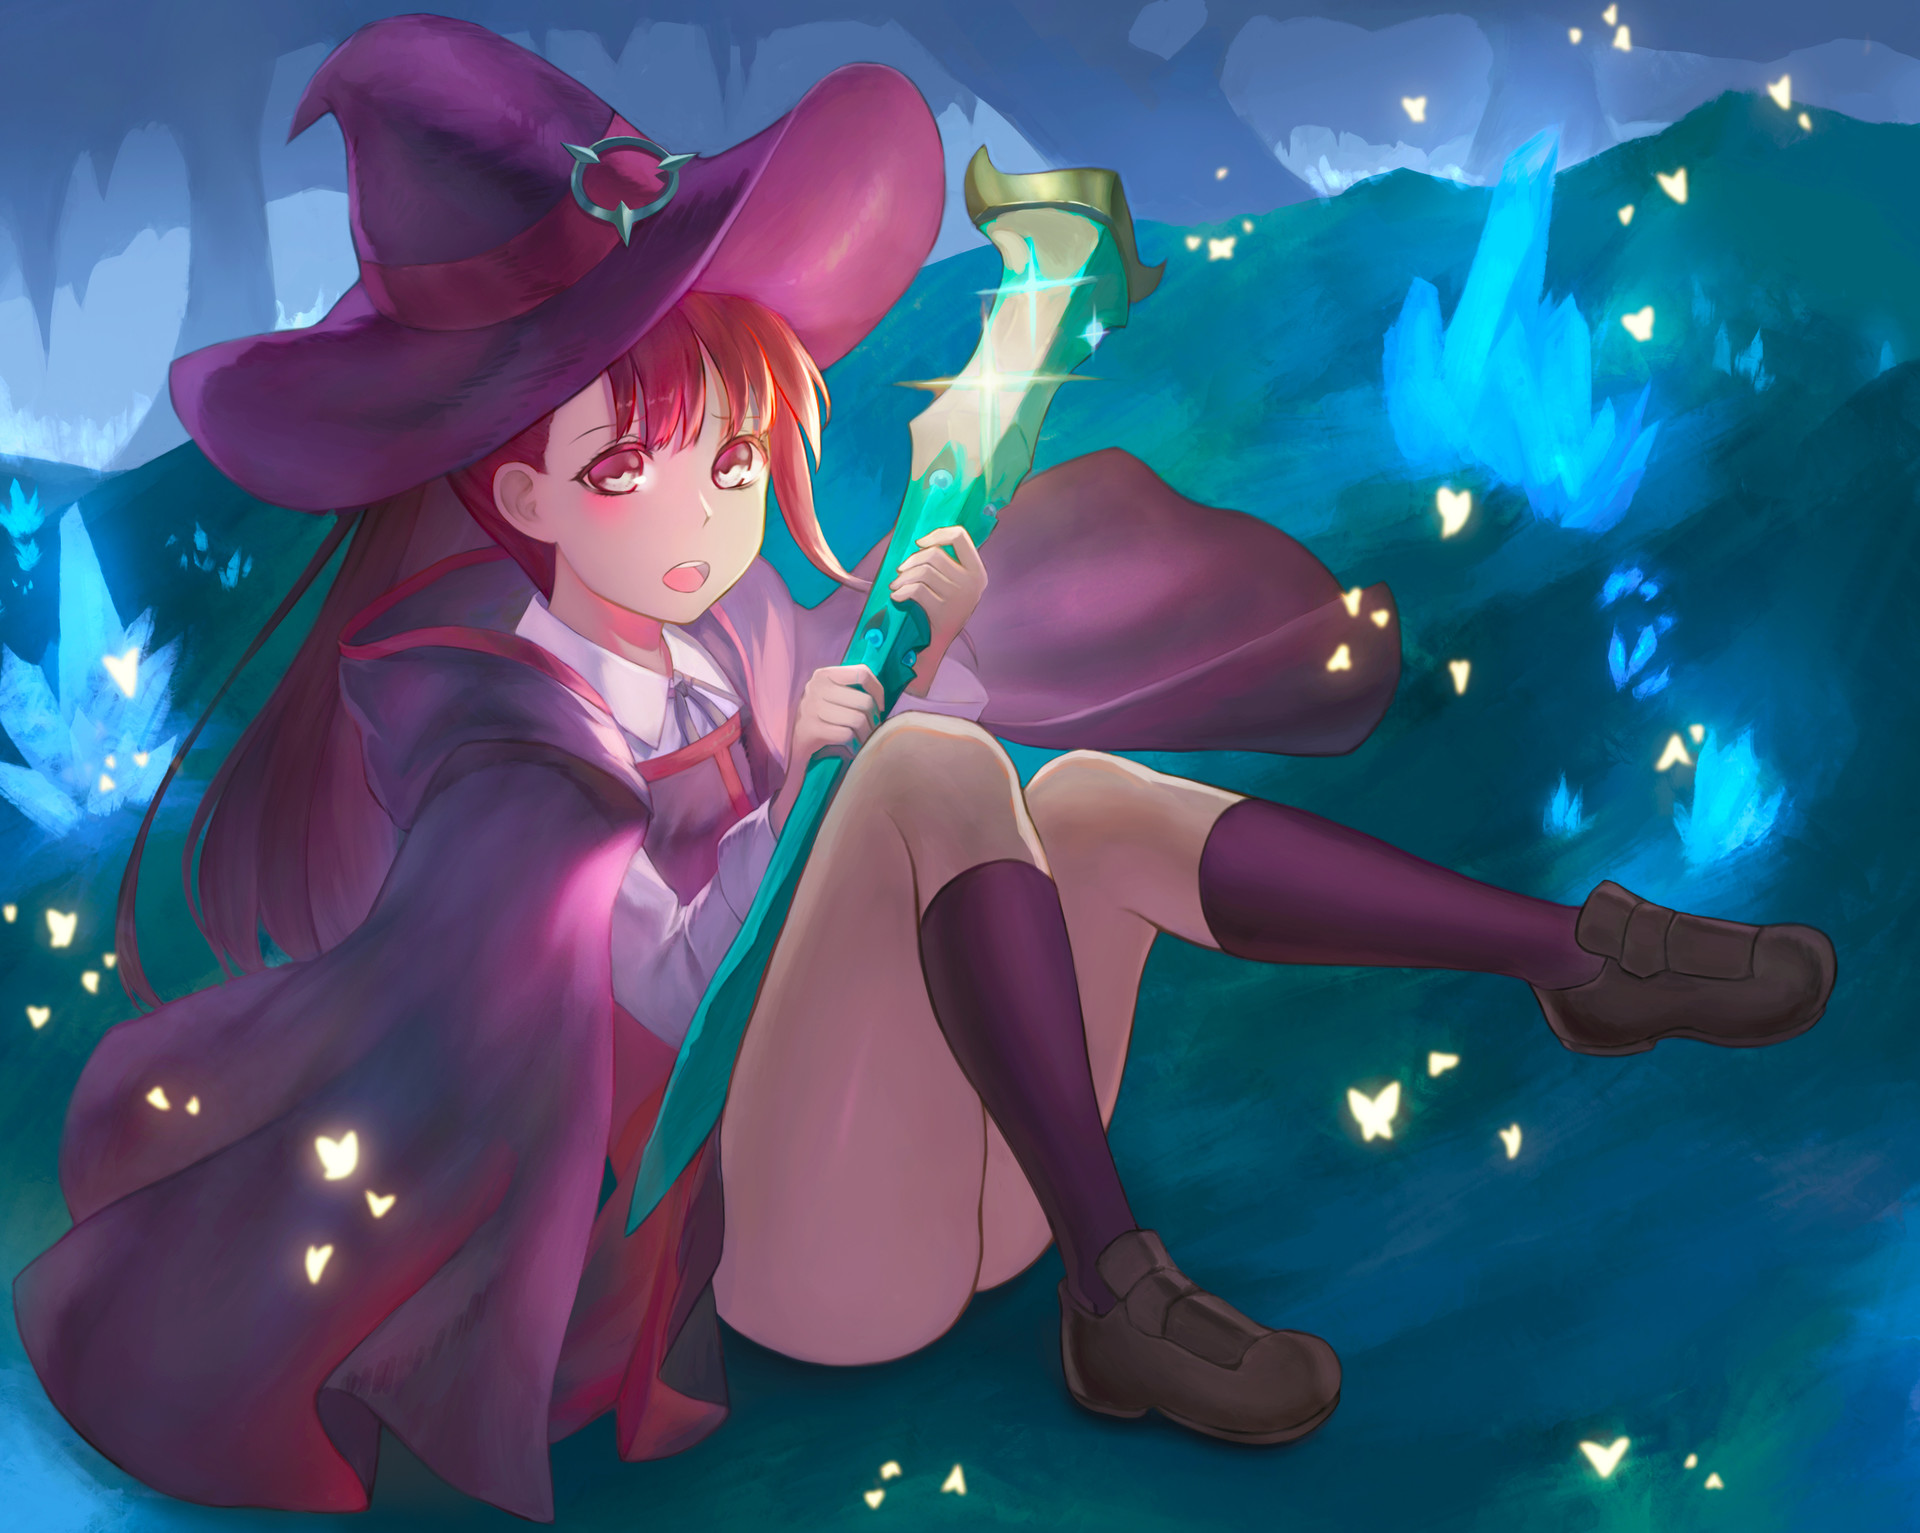 Little Witch Academia аниме